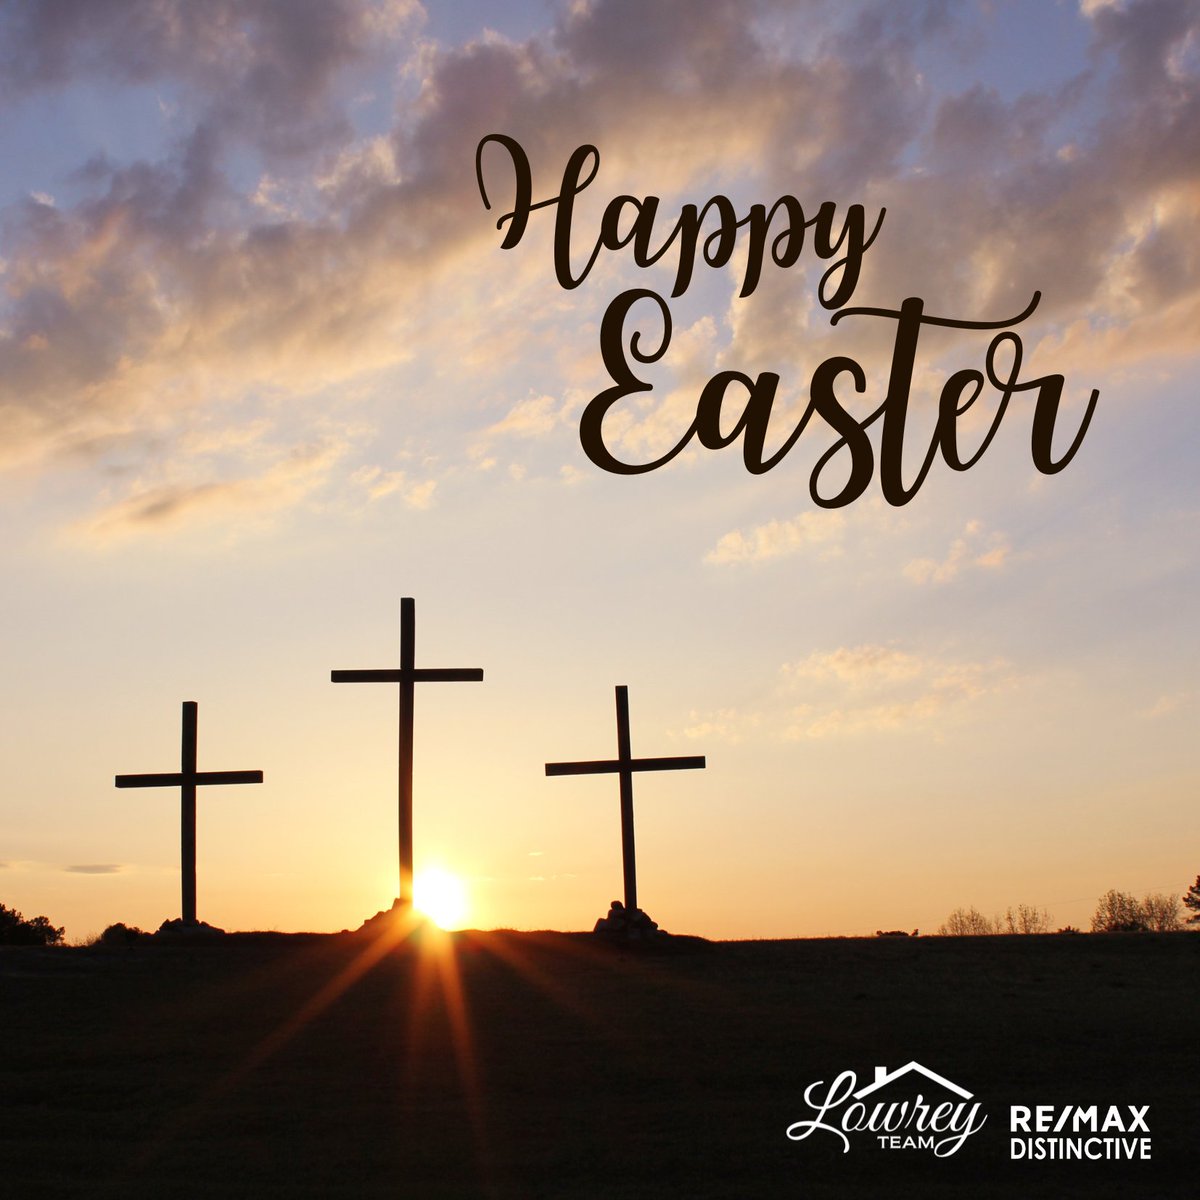 Hoppy Easter everyone! 🙏🌷 Let's celebrate this joyous day with loved ones, delicious treats, and endless gratitude. Wishing you a blessed day! #Easter #RemaxDistinctive #Lowreyteam #abovethecrowd #BecauseHeLives